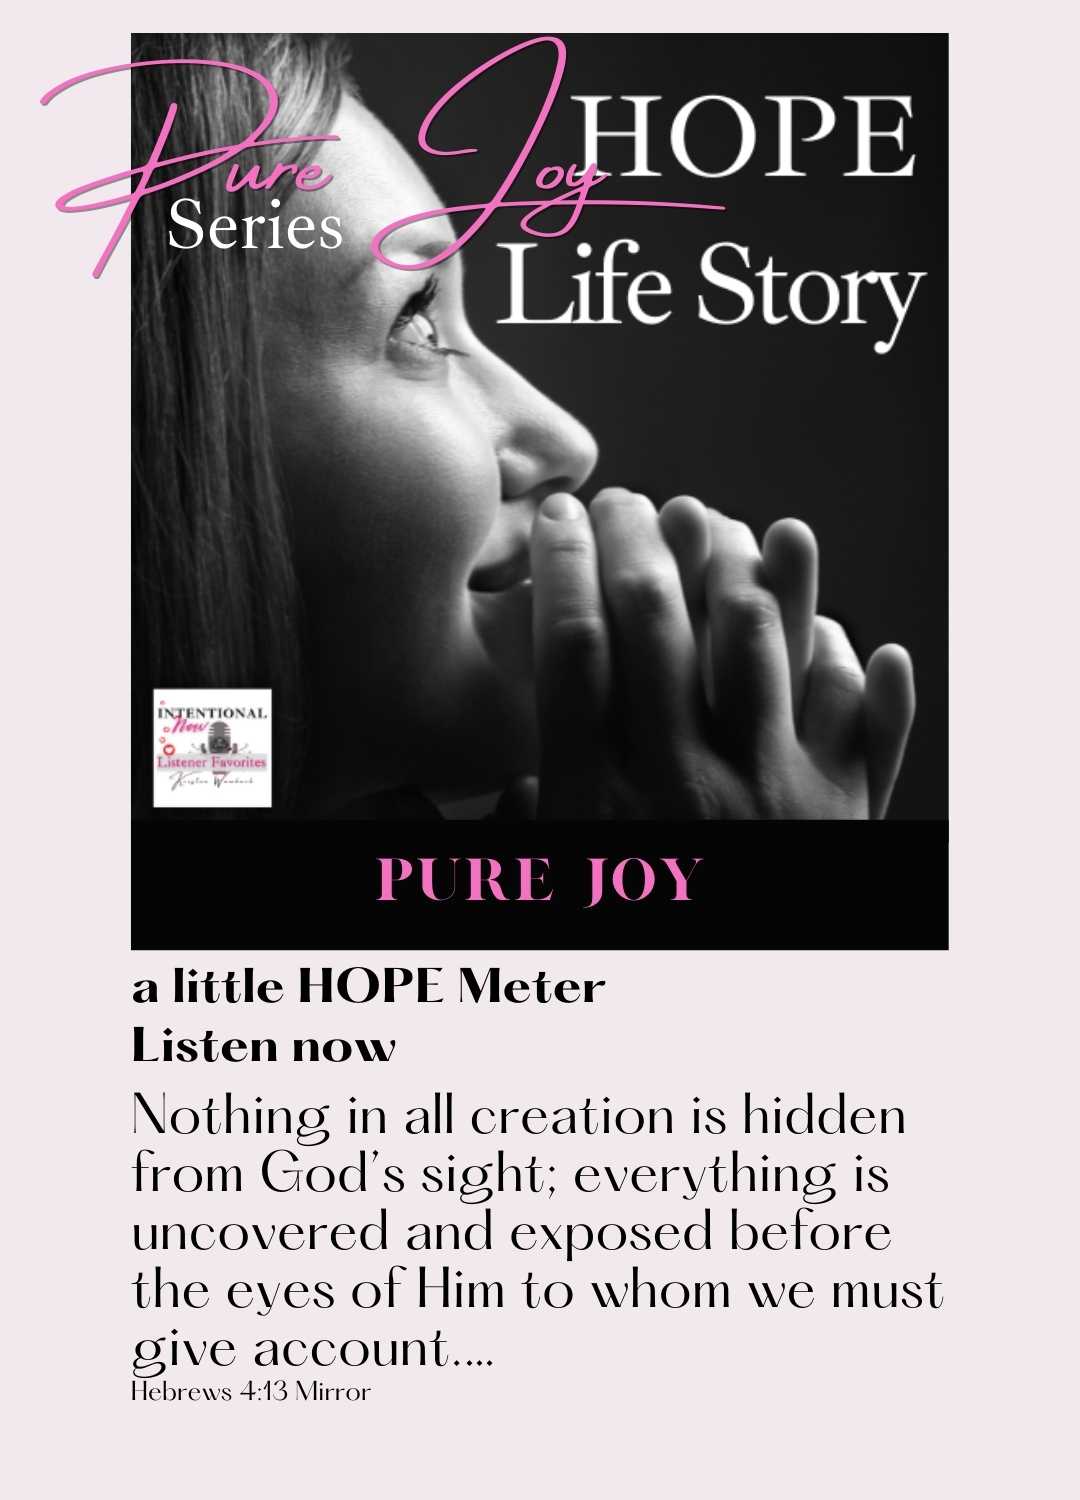 Intentional Now Podcast HOPE, Life Story